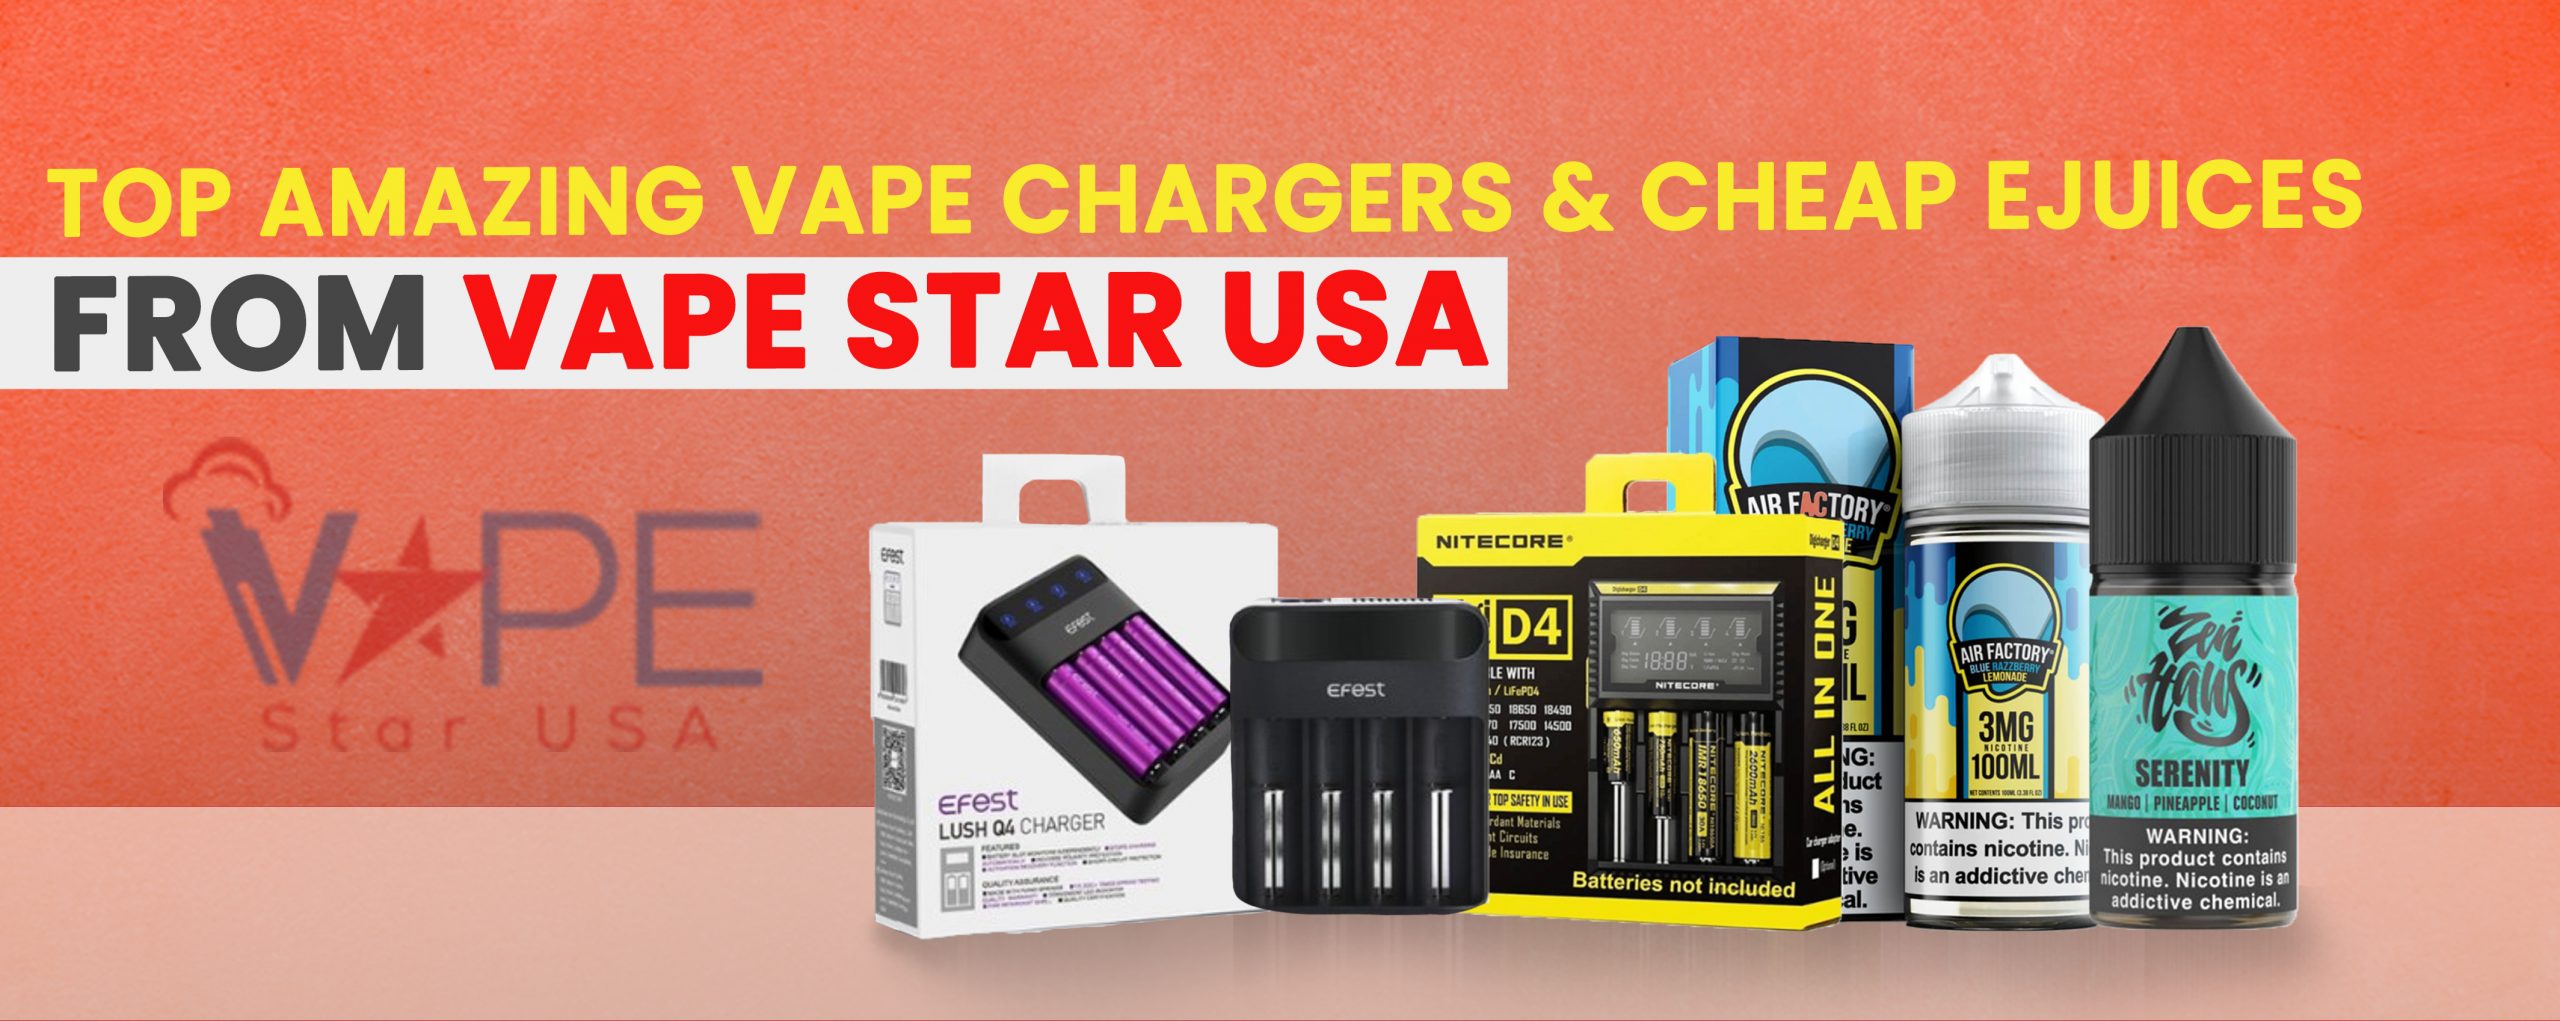 Buy Top Amazing Vape Chargers & Cheap Ejuices from Vape Star USA